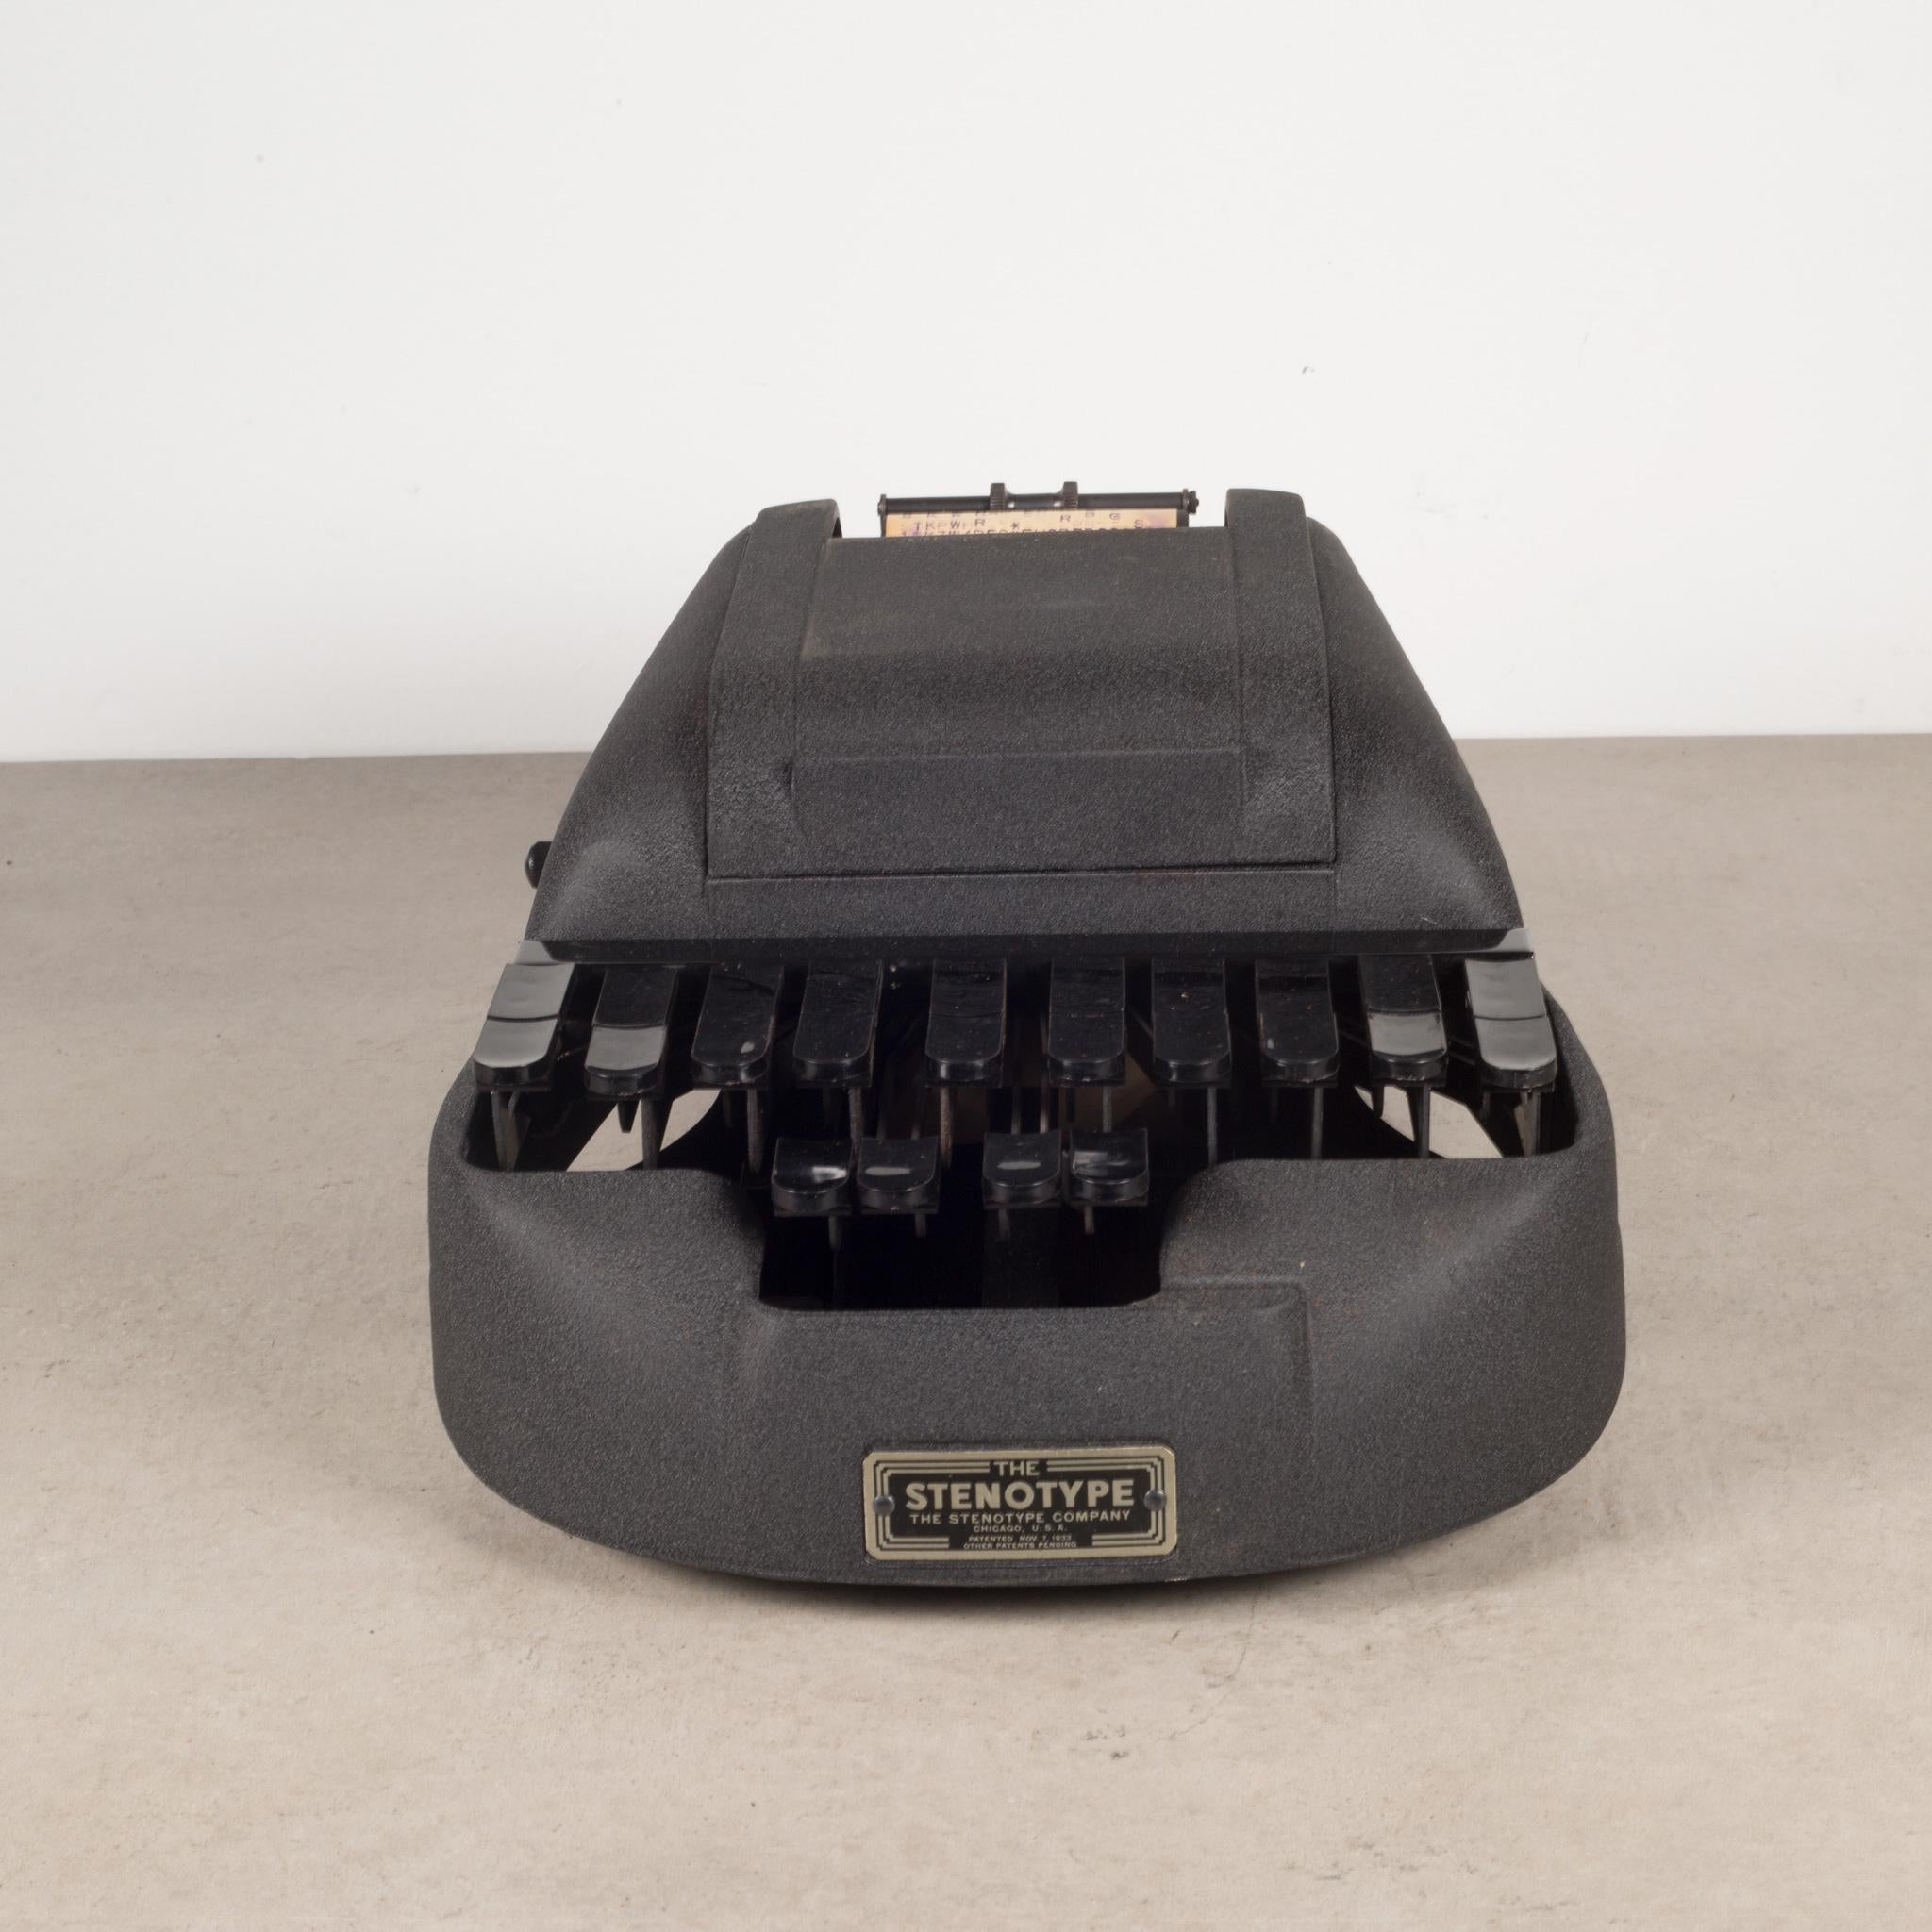 Antique Art Deco Stenograph with Original Case c.1920-1930 (FREE SHIPPING) In Good Condition For Sale In San Francisco, CA